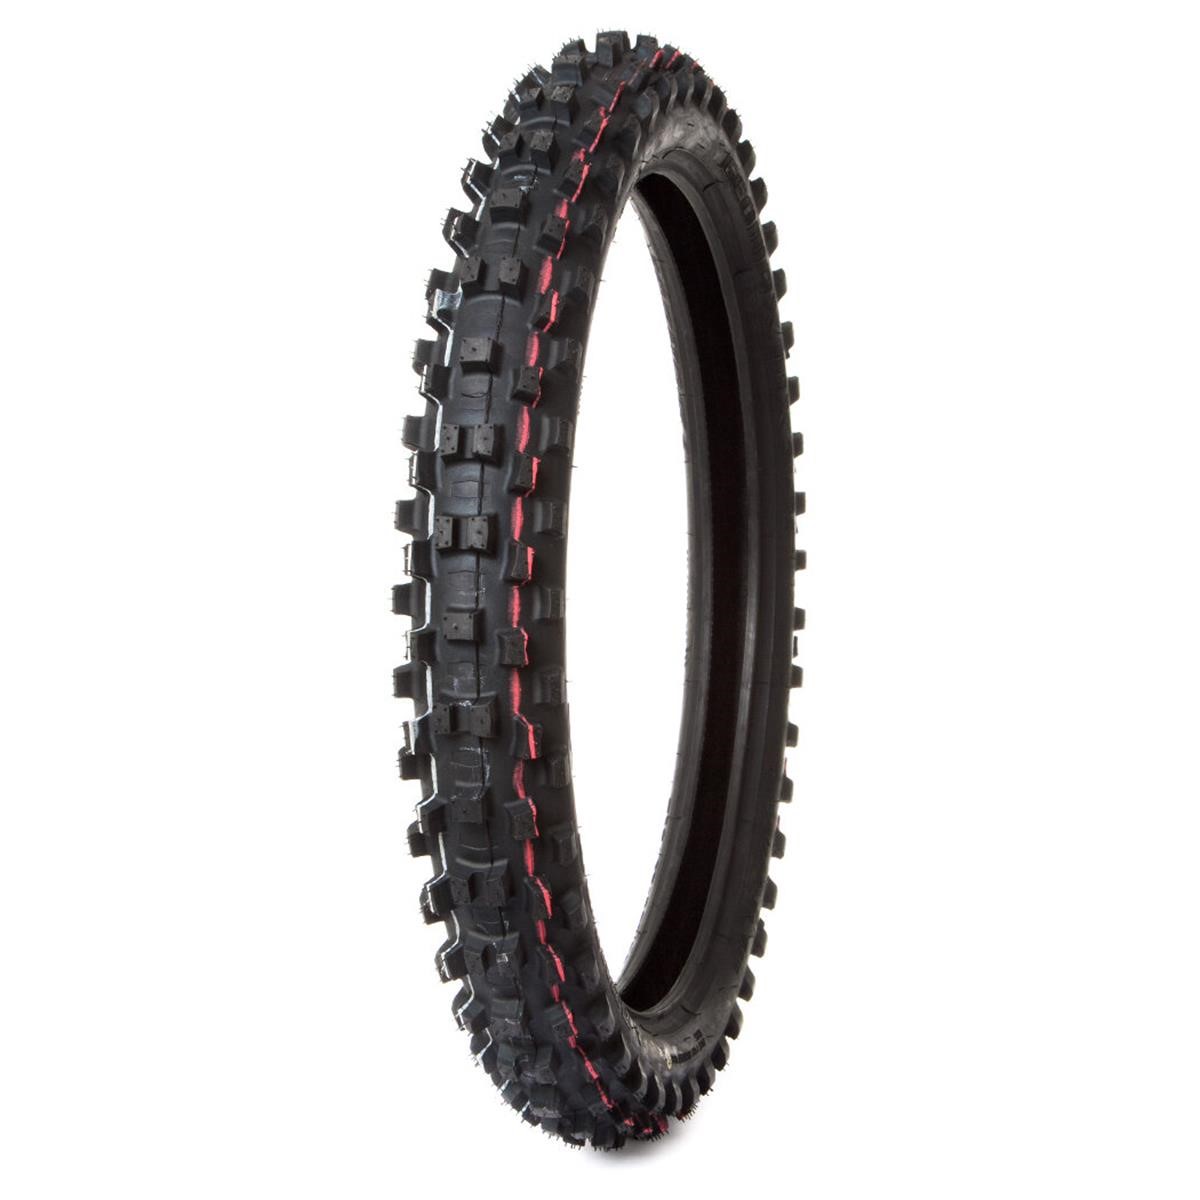 Dunlop Front Tire Geomax MX 3S Motocross 60/100-14